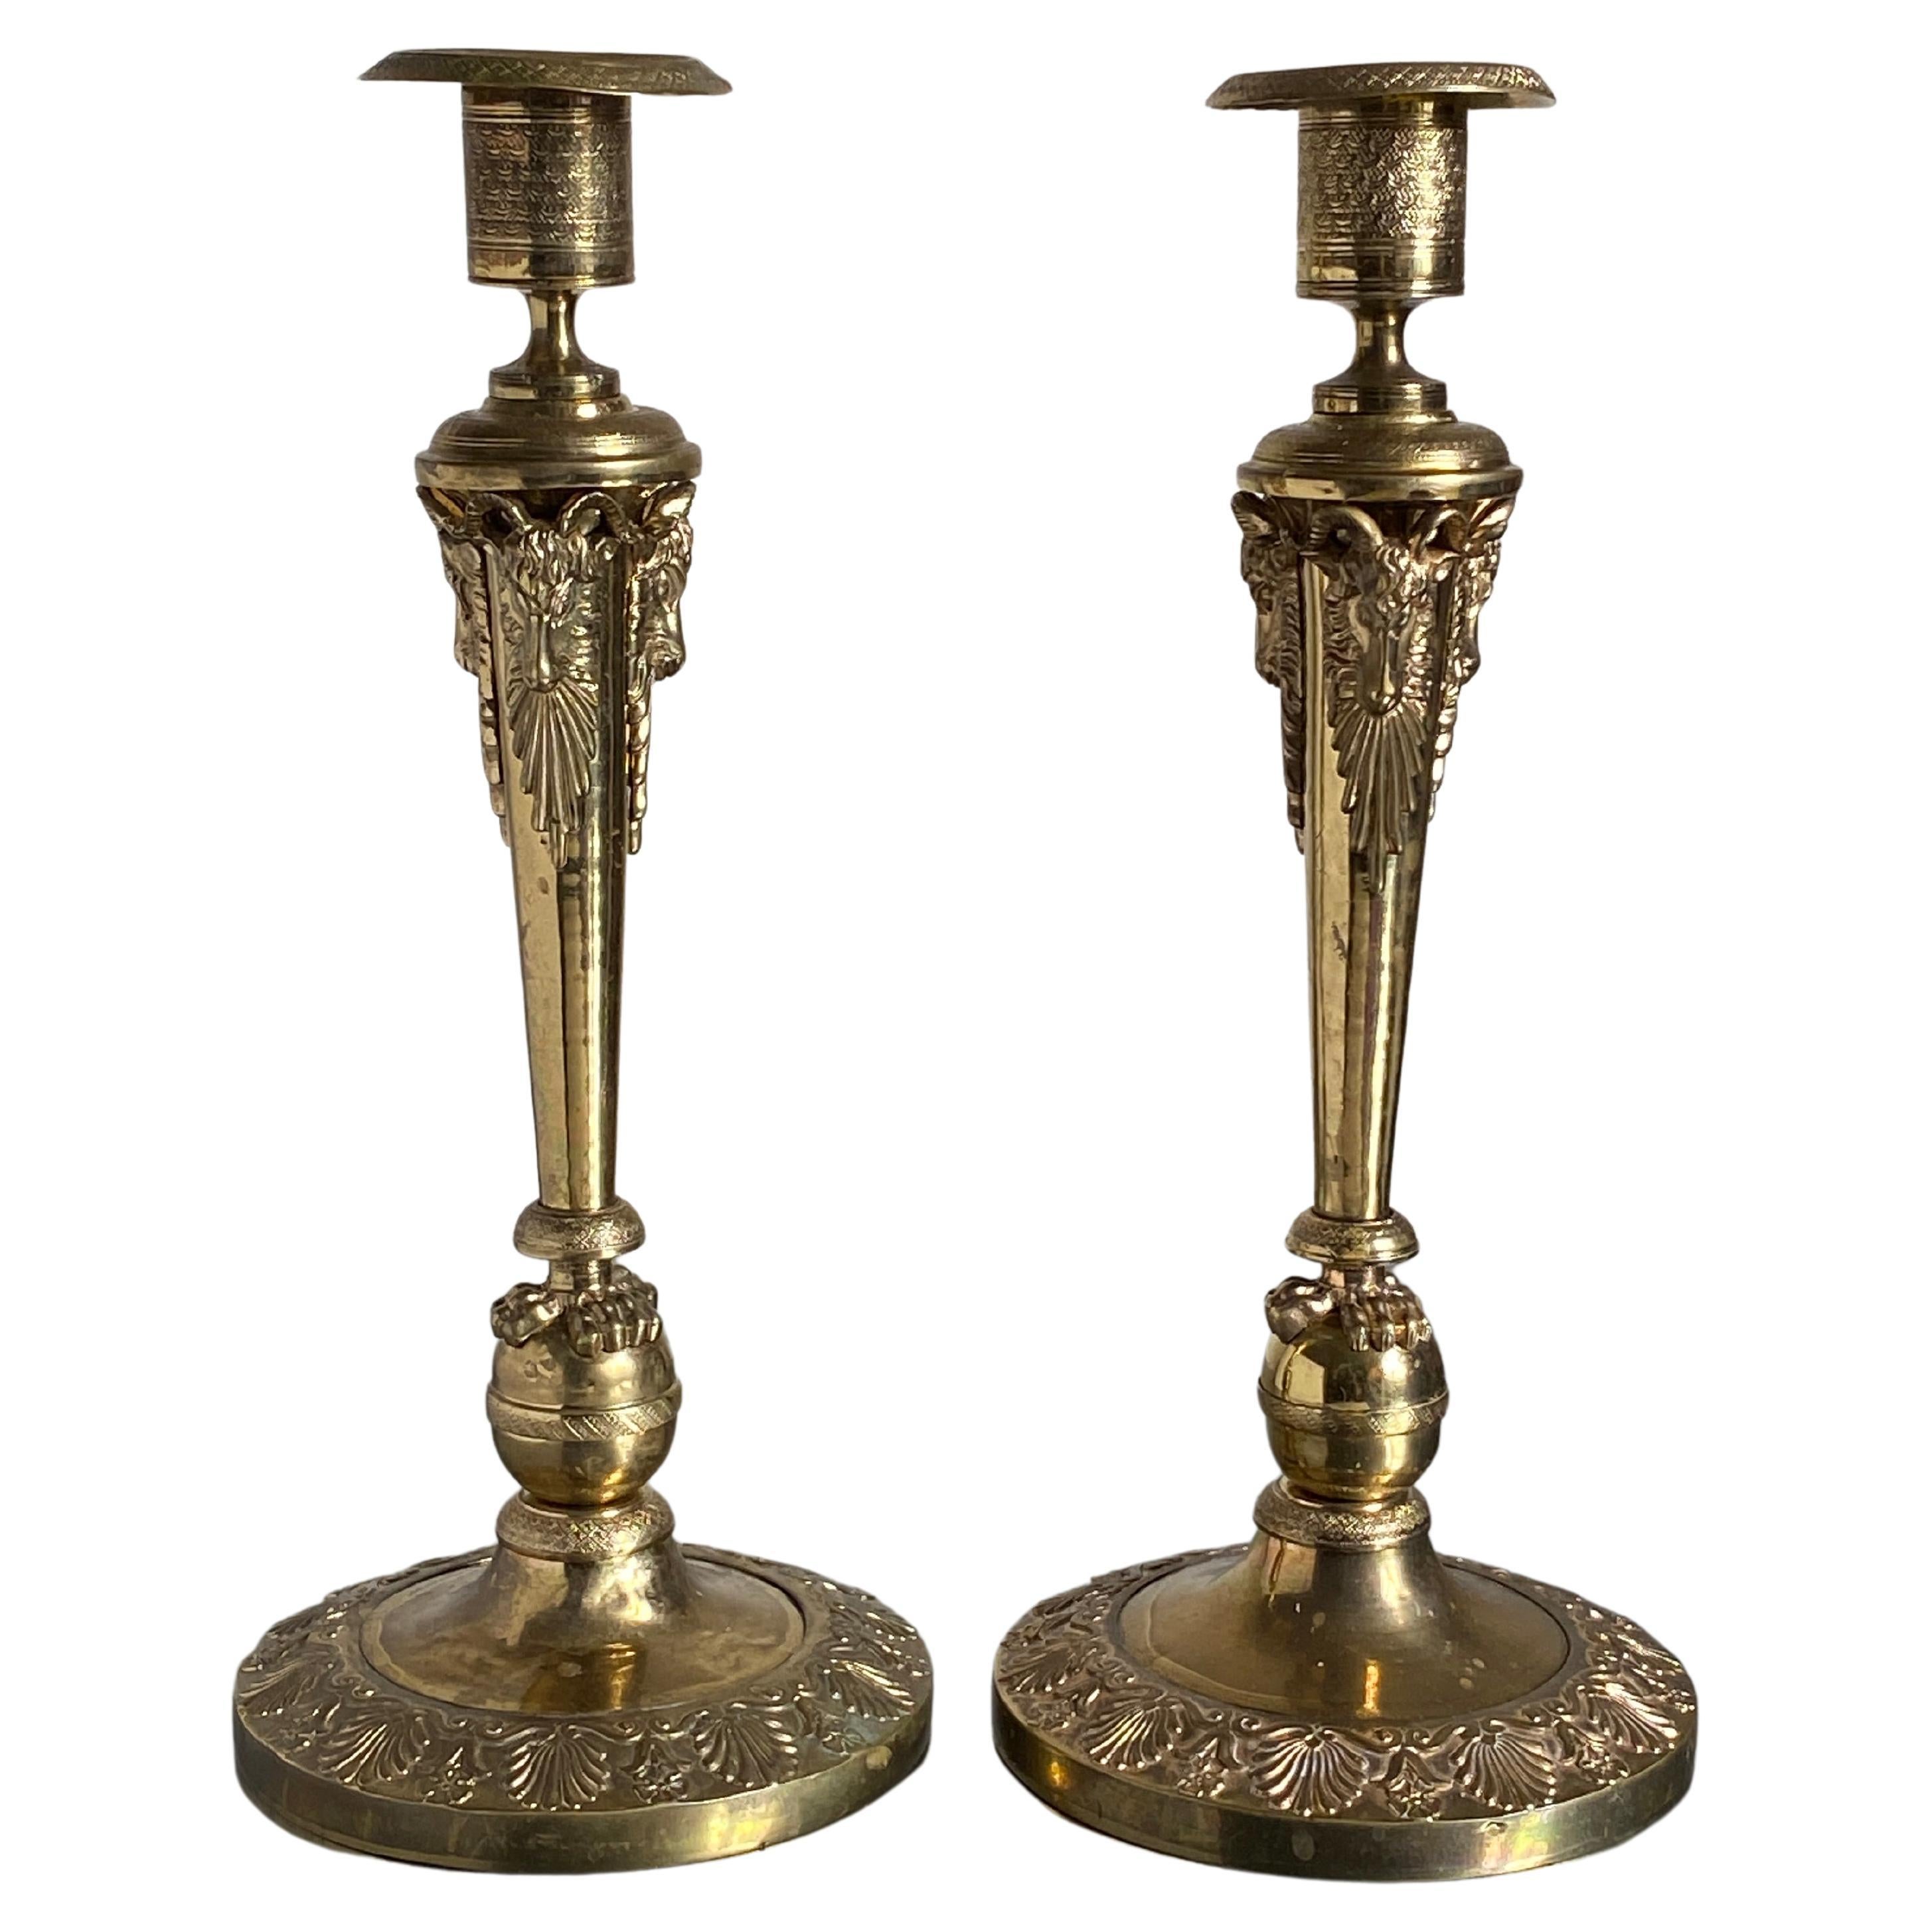 A Pair of Russian Empire gilt bronze candlesticks produced in France / Russia around 1810 in the manner of Pierre-Philippe Thomire

Of substantial size and expertly cast in matt and burnished gilt bronze. 

This model was often attributed to the